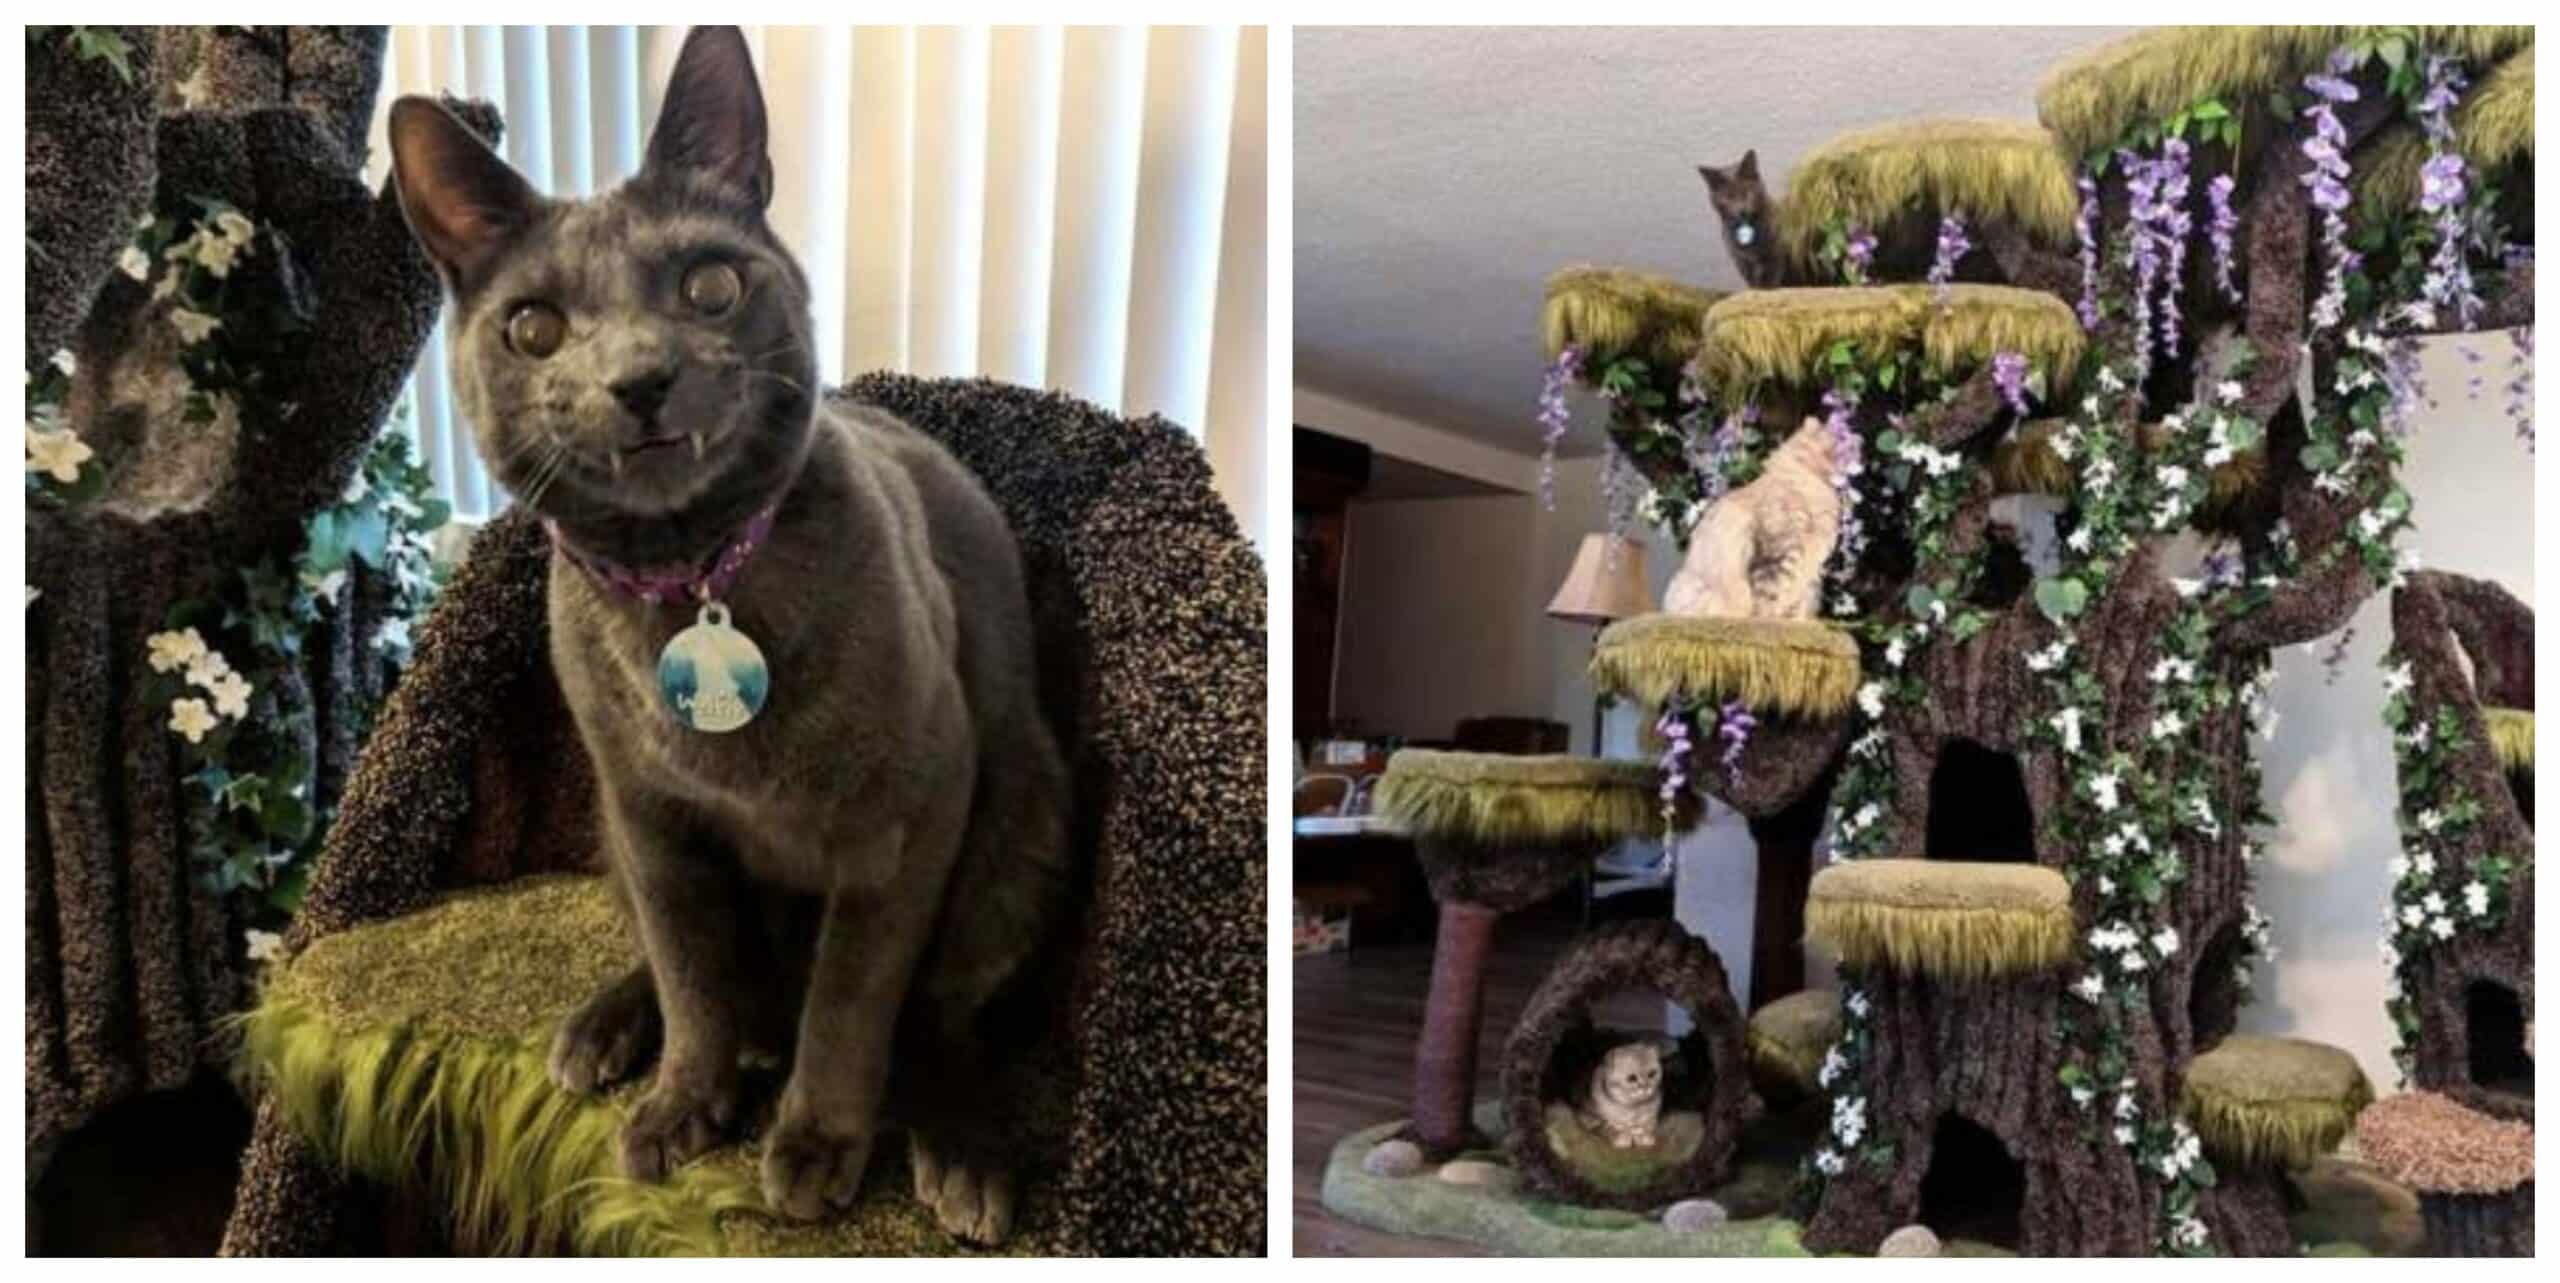 Mom buys a special cat tree for her cat with special needs